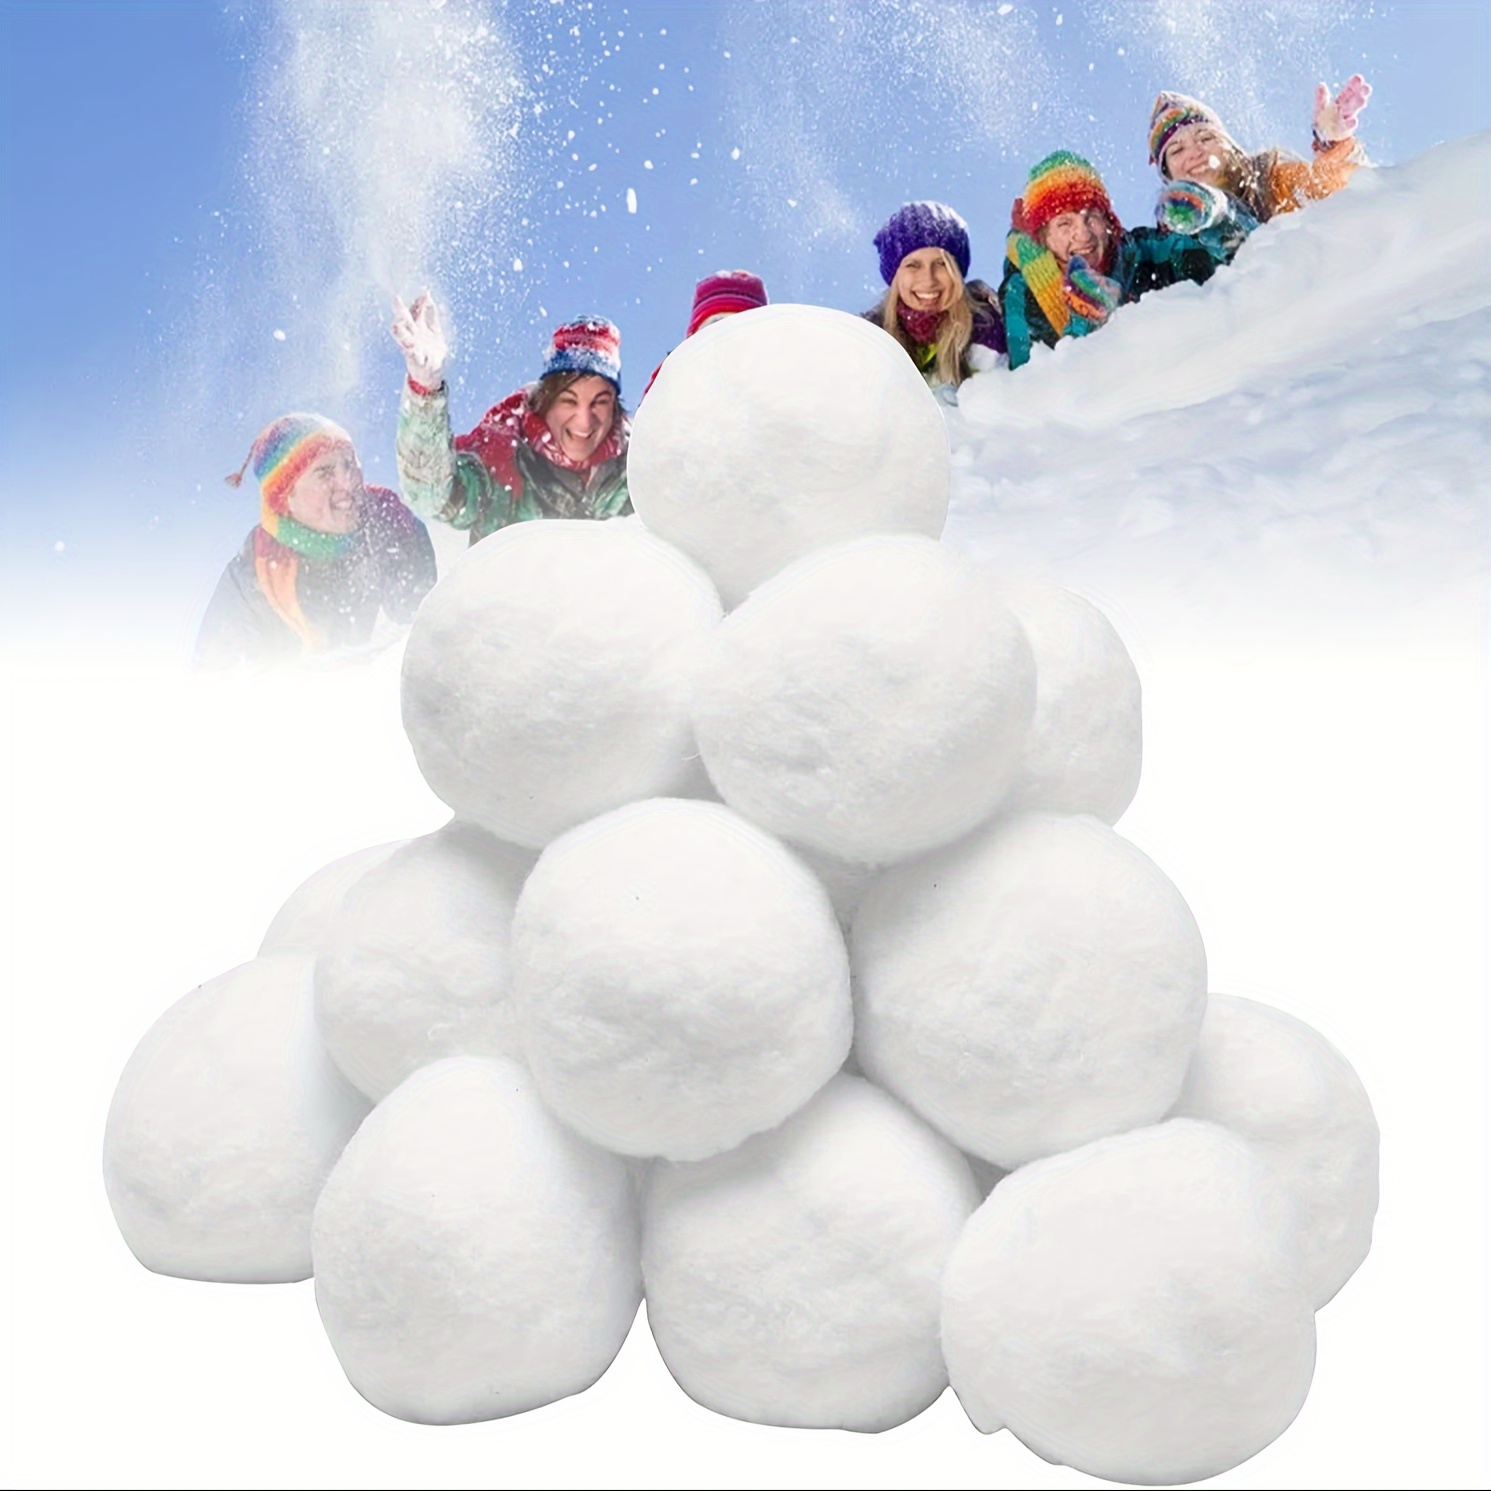 40 Pack Indoor Snowballs for Kids Snow Fight,Fake Snowballs Xmas  Decoration,Realistic White Plush SnowBalls for Kids Adults Game 